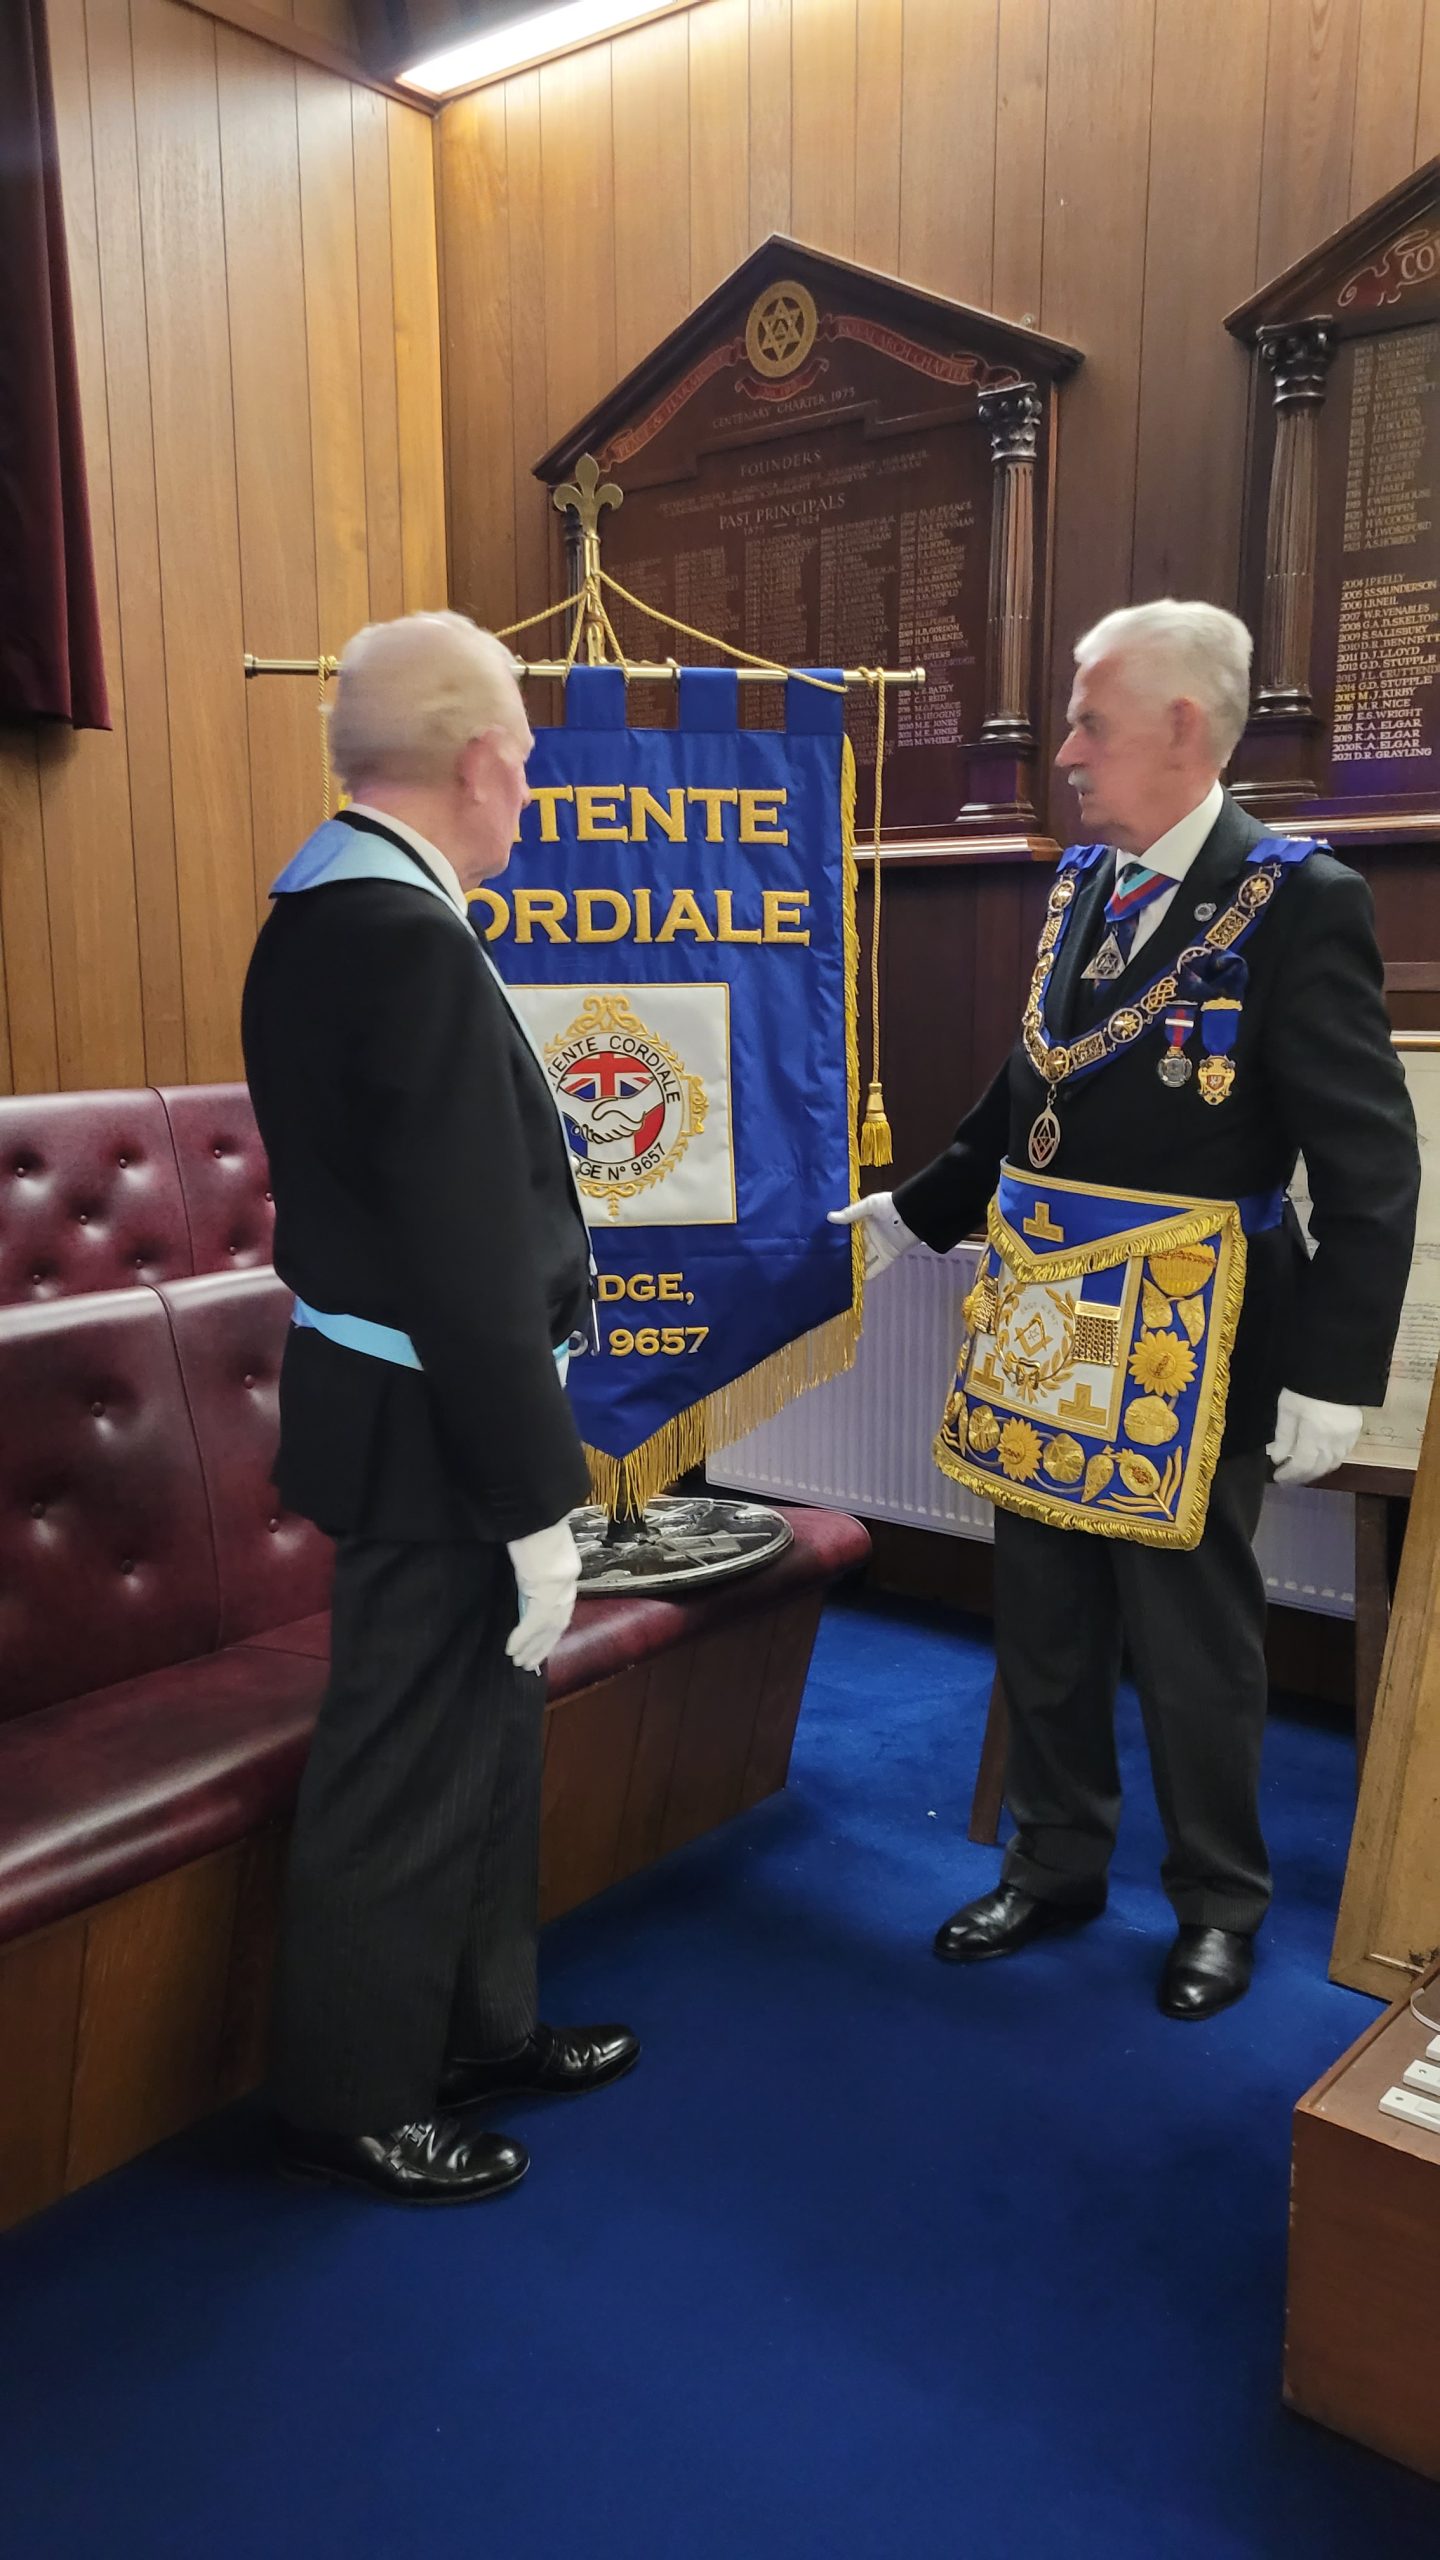 The PGM unveils the Lodge banner with the WM looking on.